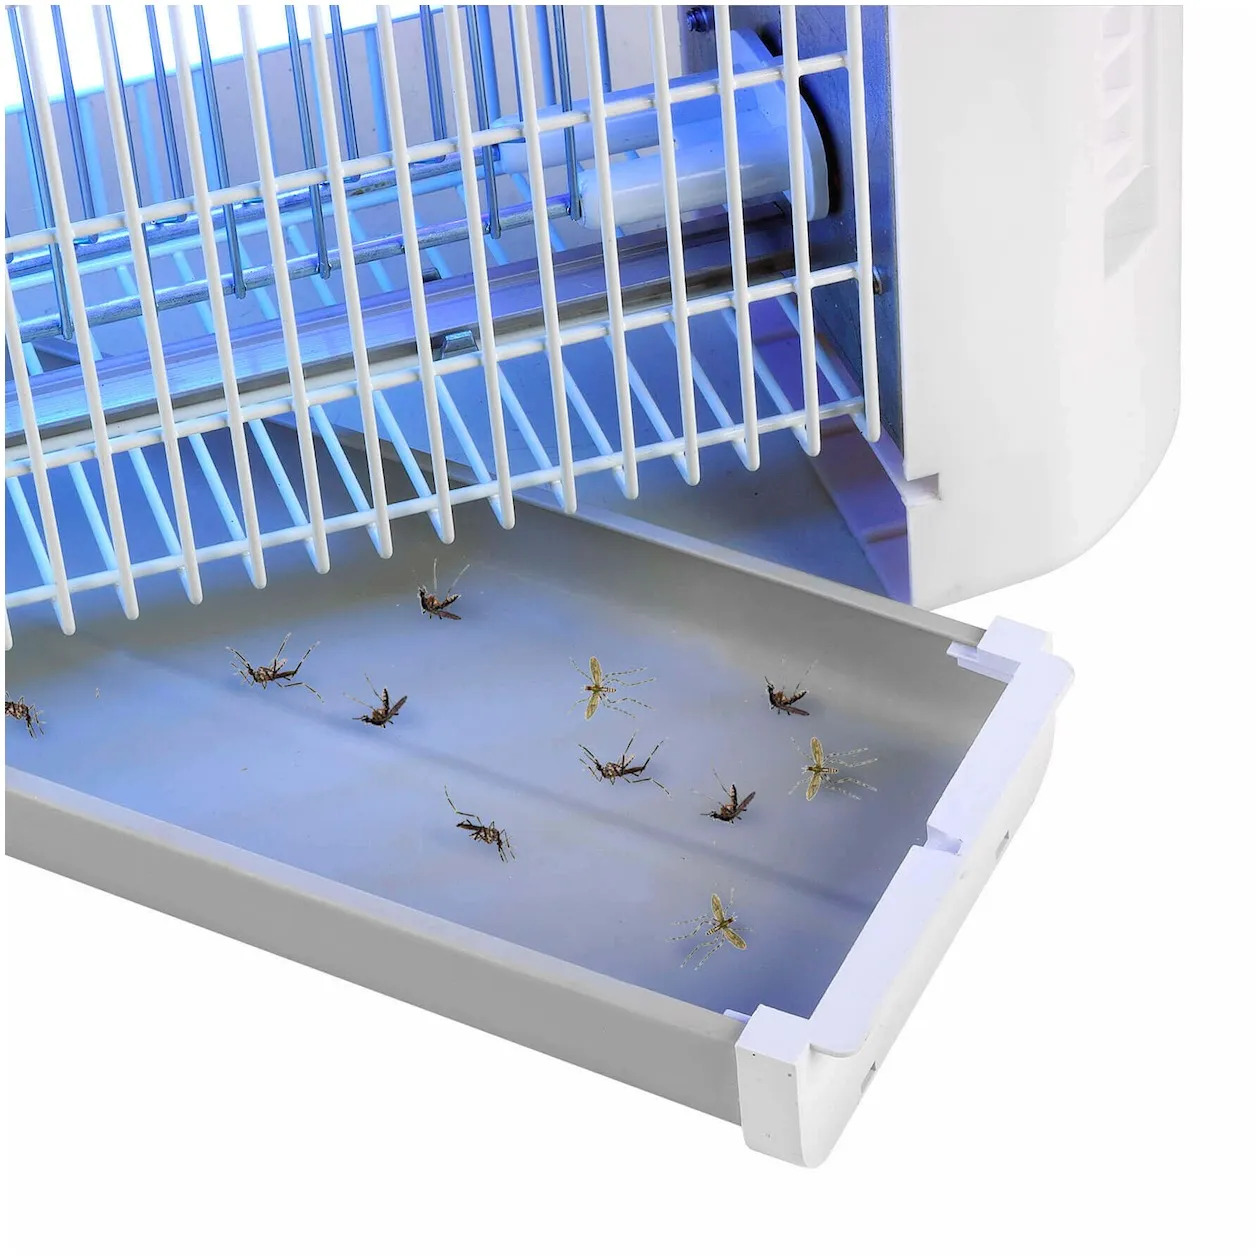 Eurom Fly Away All-round 30 Insect killer